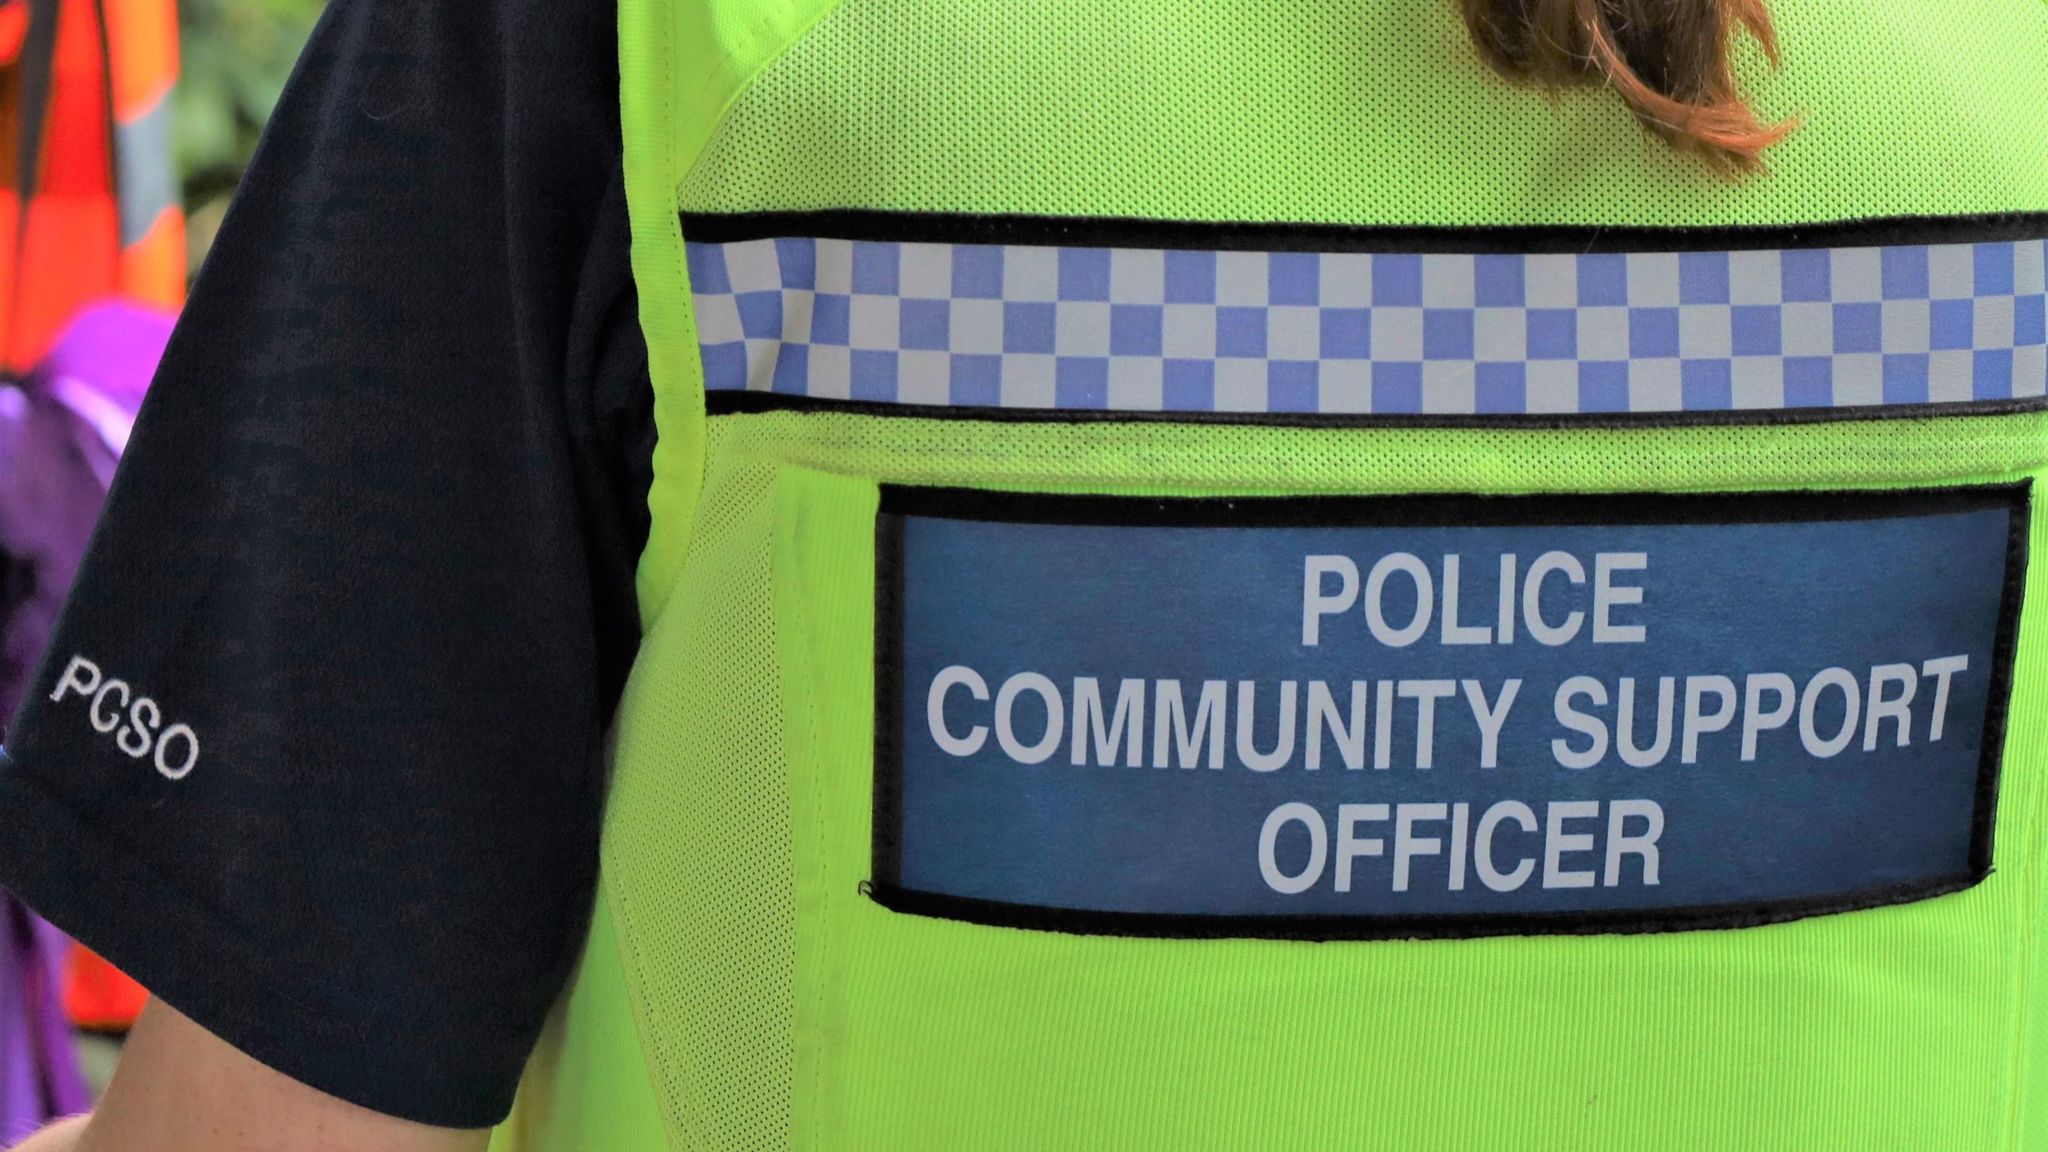 Police community support officer's (PCSO) uniform